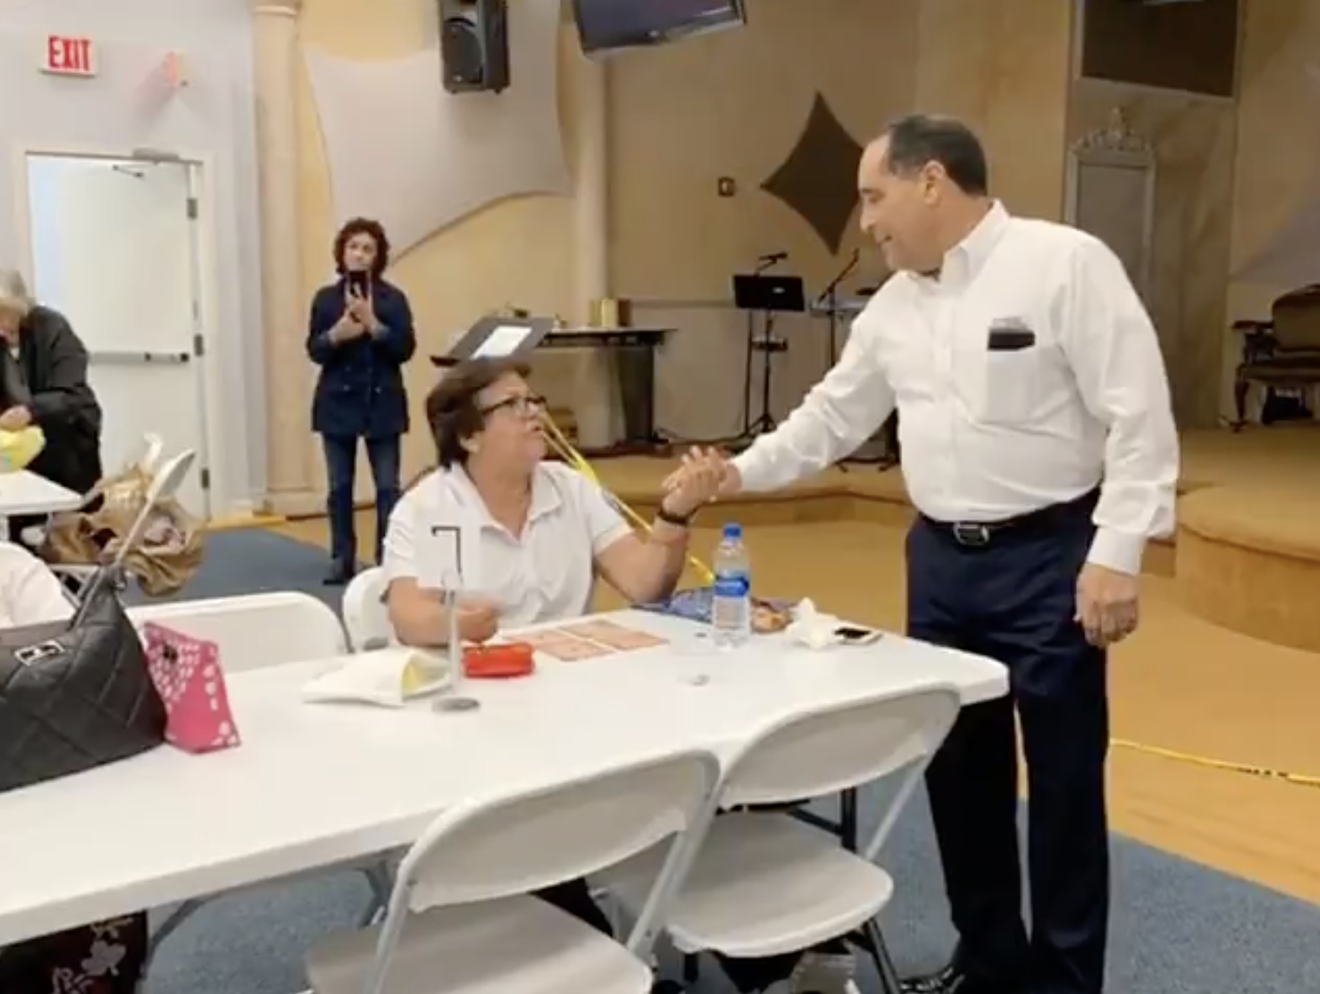 Miami-Dade Commissioner Joe A. Martinez visited two senior centers and shook plenty of hands amid the COVID-19 outbreak.